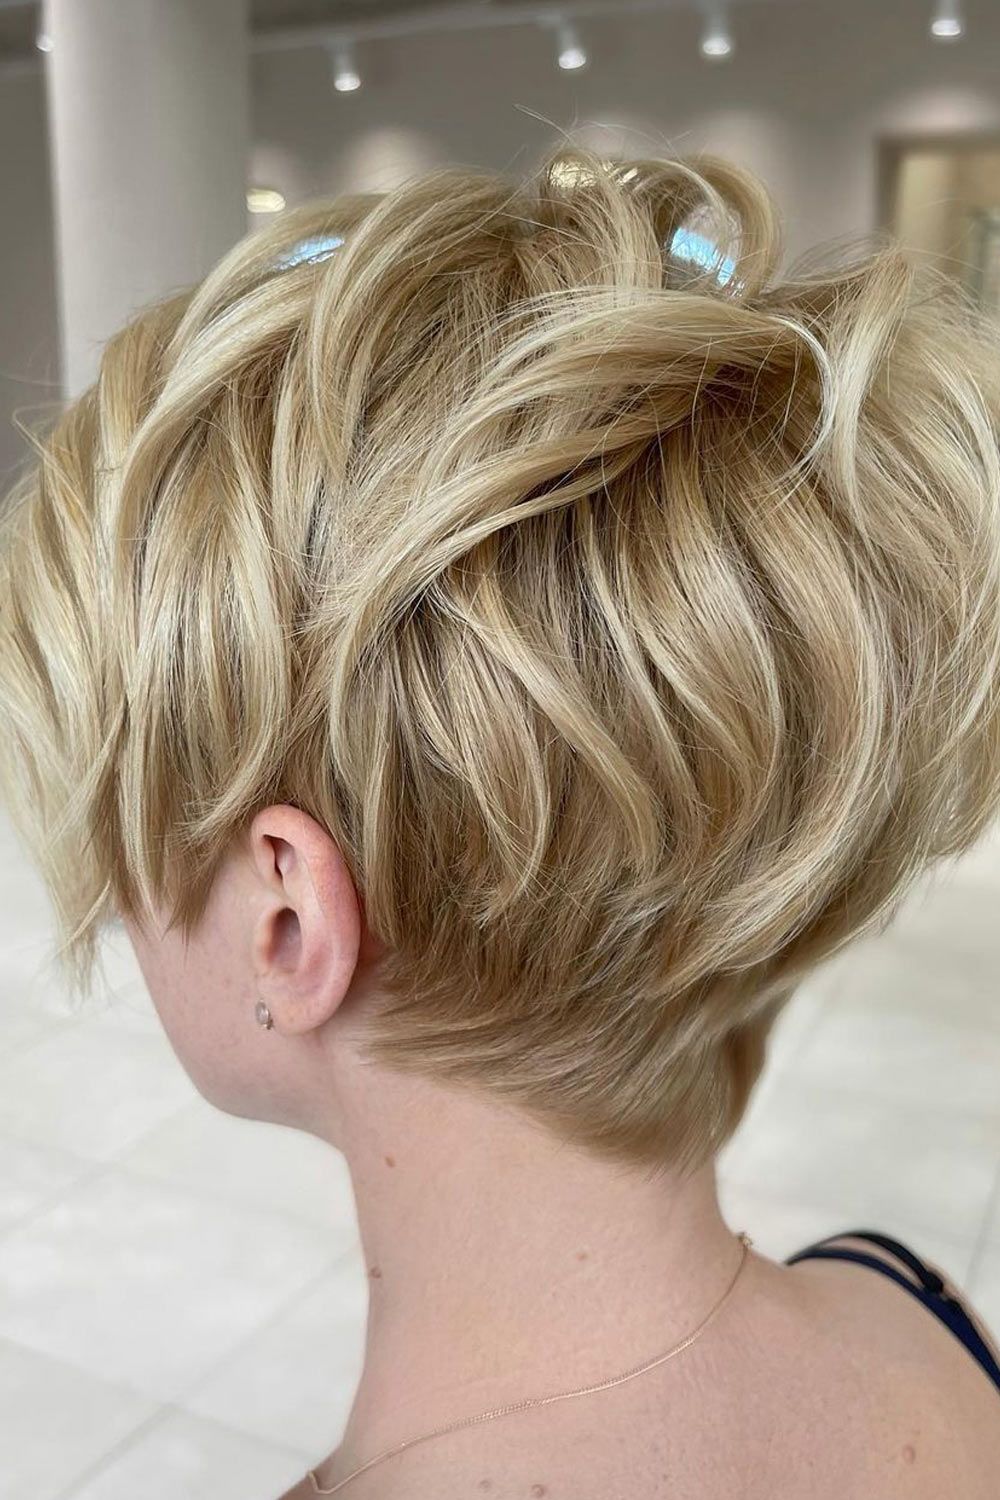 The Mix of two popular summer hairstyles for women, namely a pixie and a bob